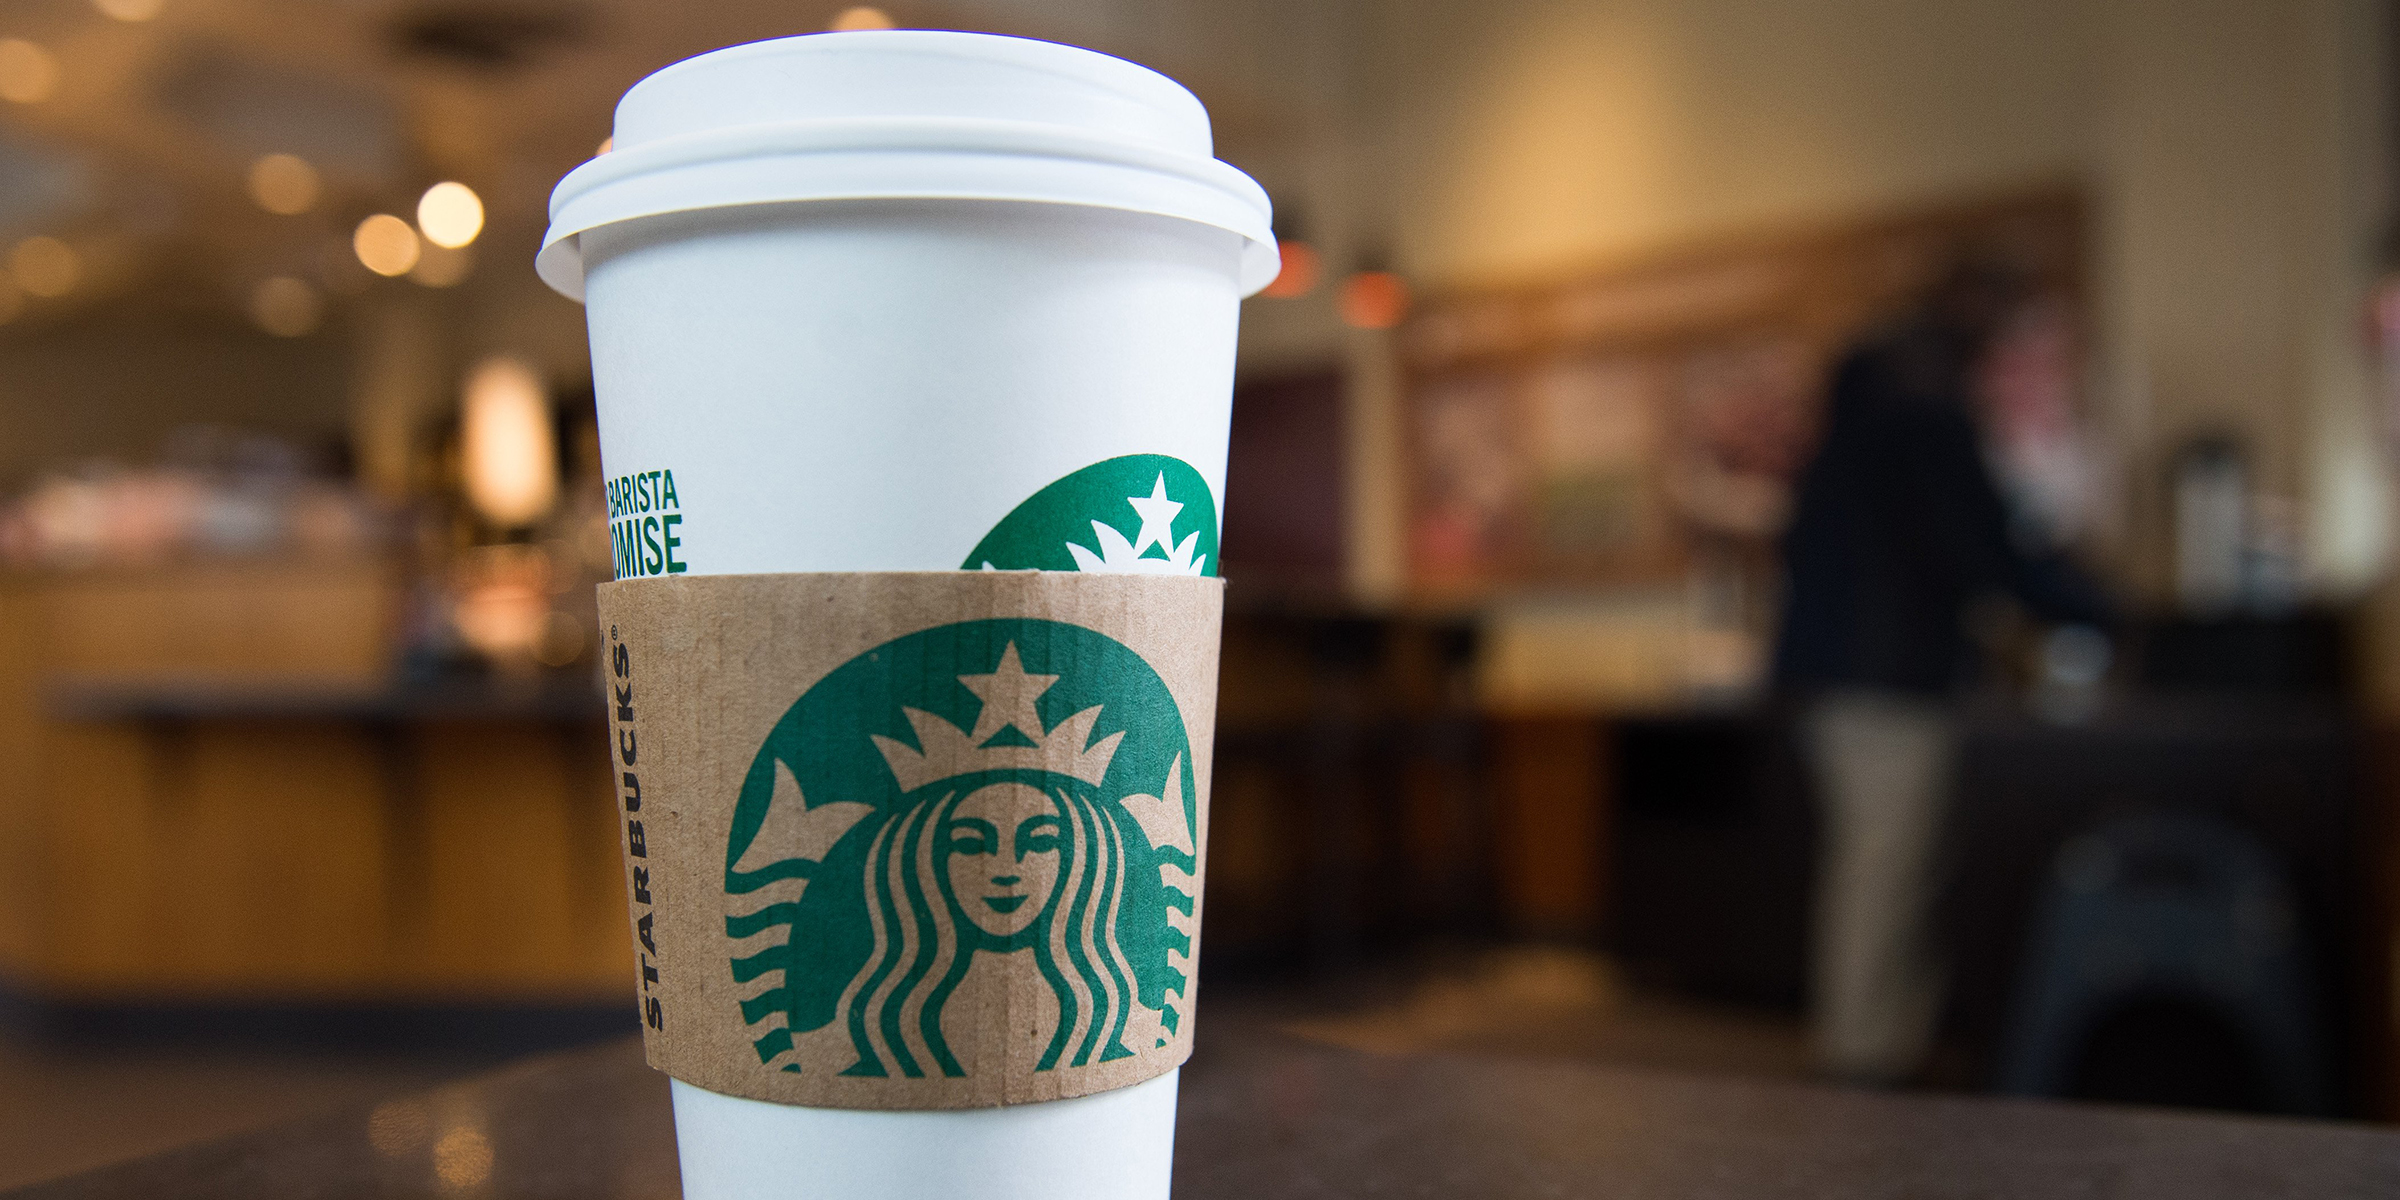 Free Starbucks Coffee All Day Today 9/29